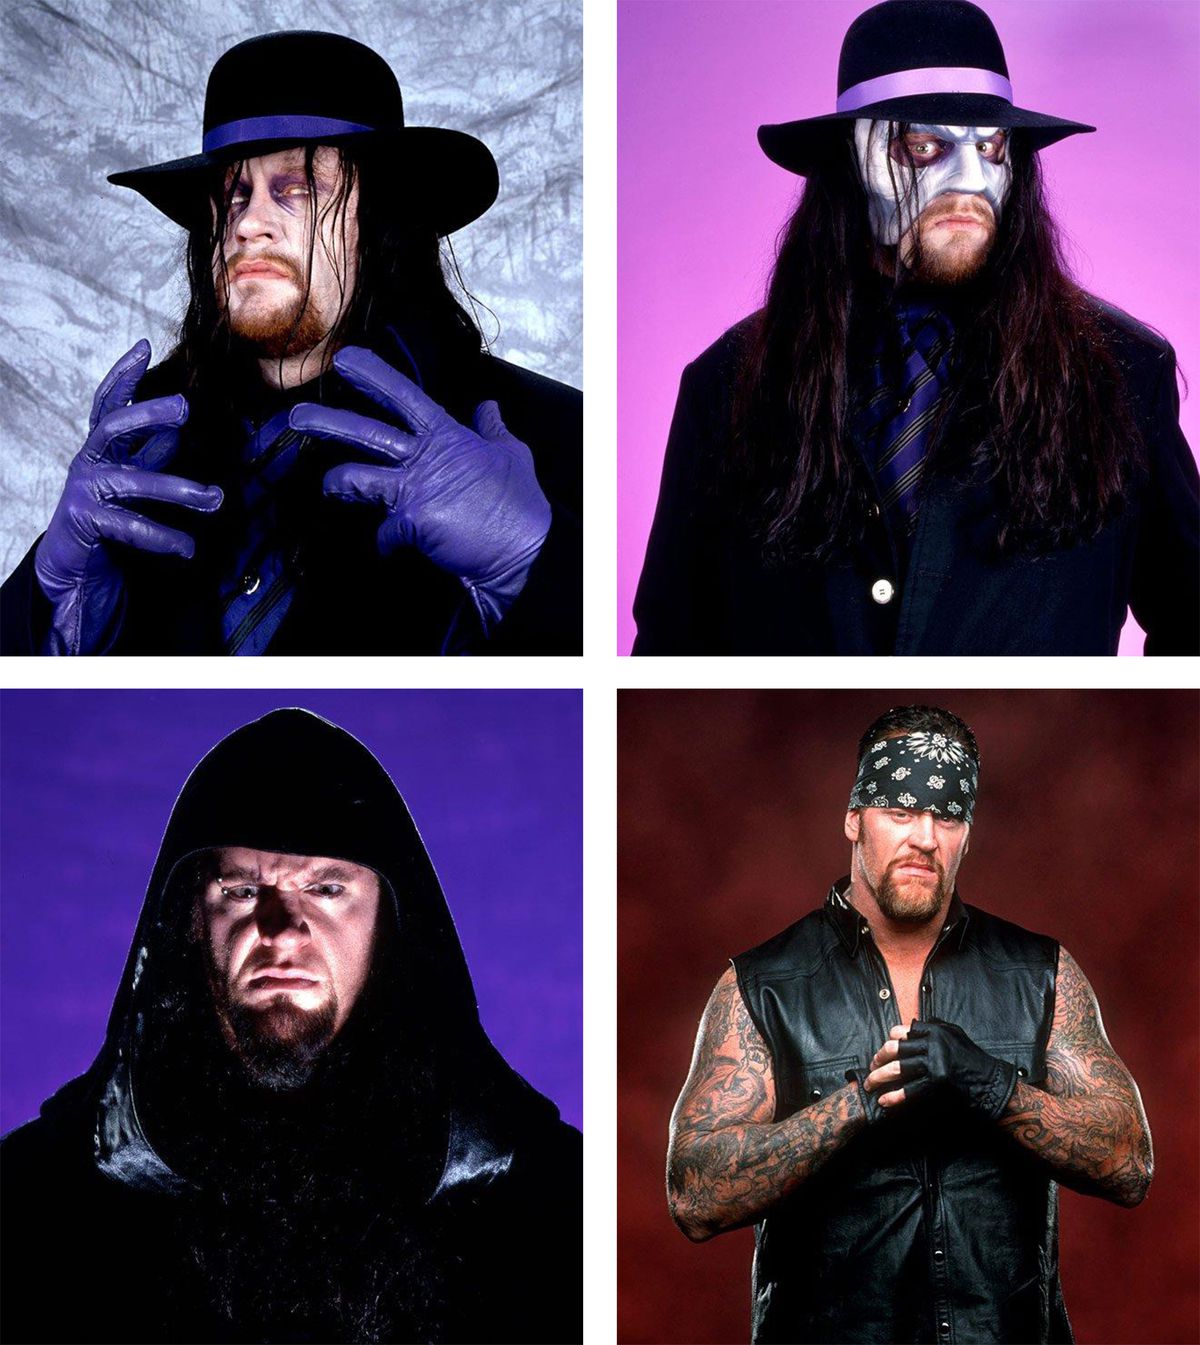 Undertaker meaning